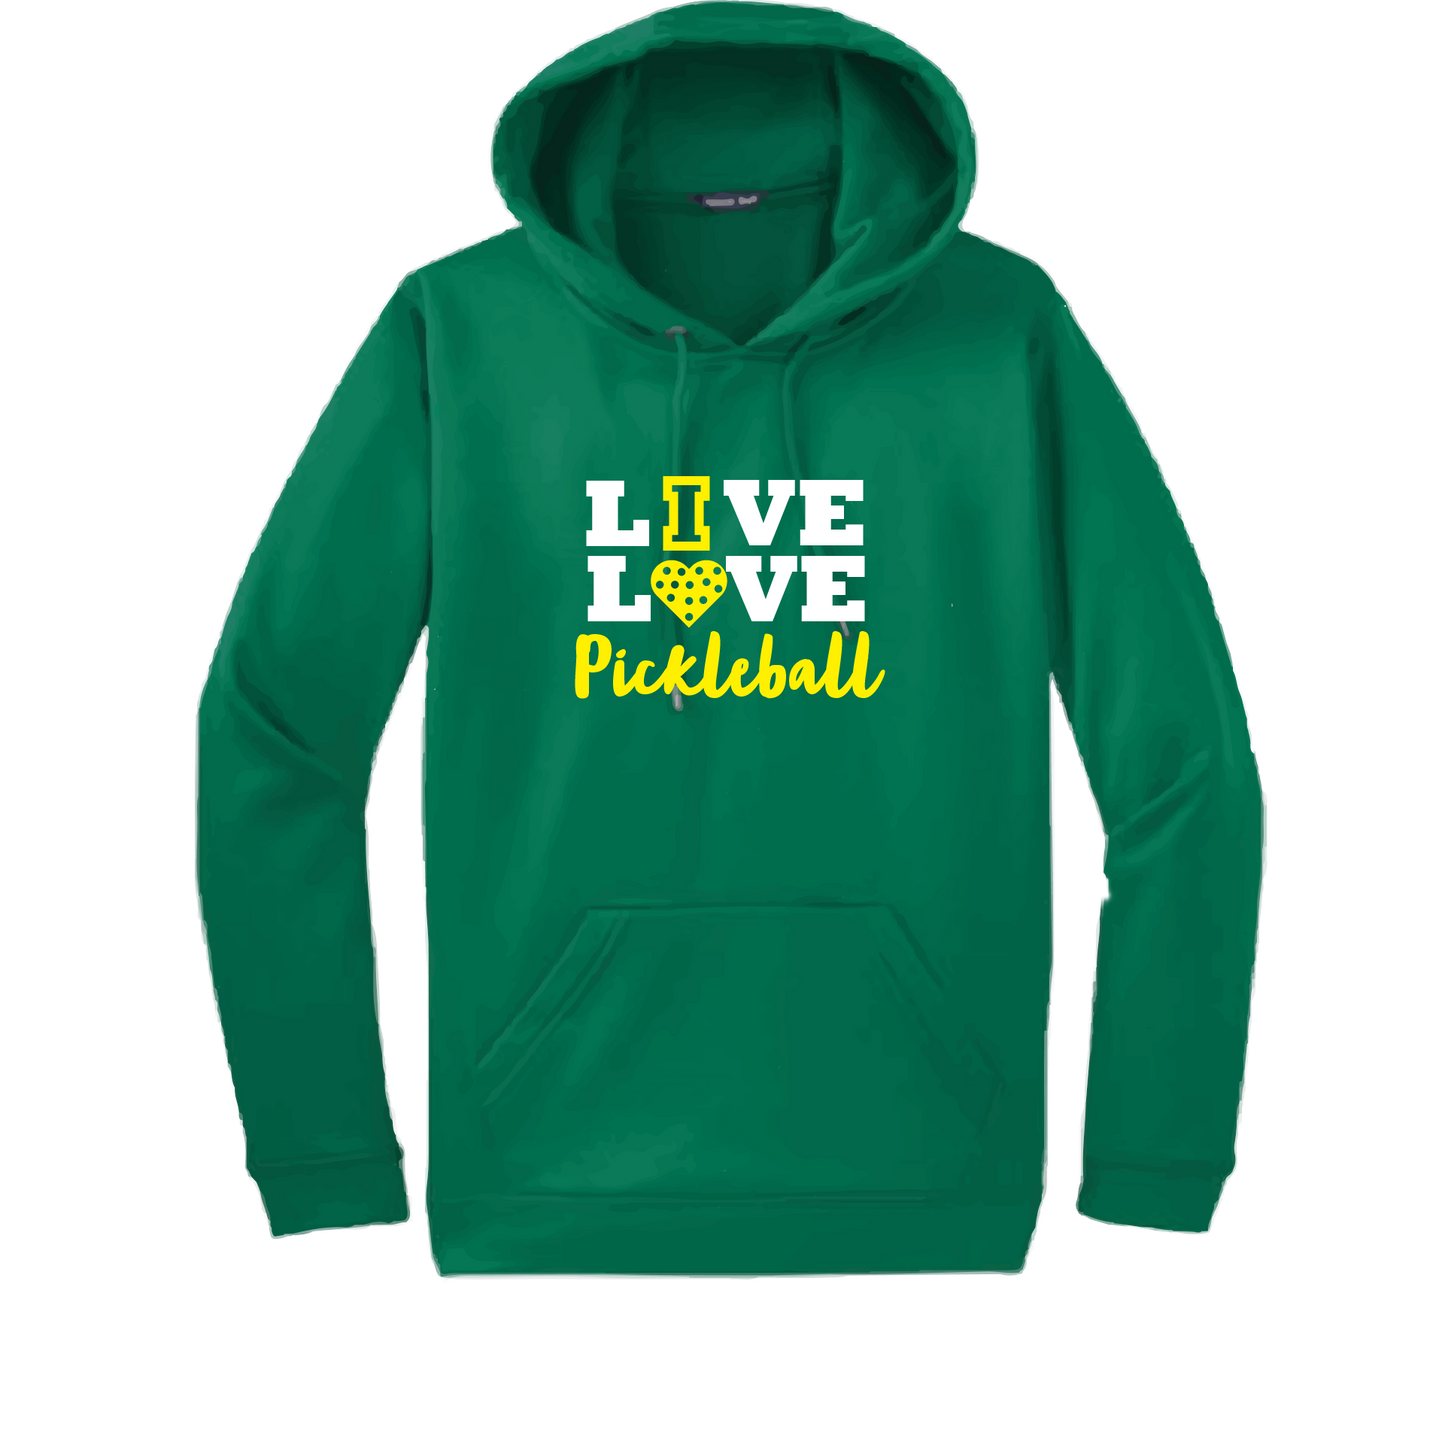 Pickleball Design: Live Love Pickleball  Unisex Hooded Sweatshirt: Moisture-wicking, double-lined hood, front pouch pocket.  This unisex hooded sweatshirt is ultra comfortable and soft. Stay warm on the Pickleball courts while being that hit with this one of kind design.